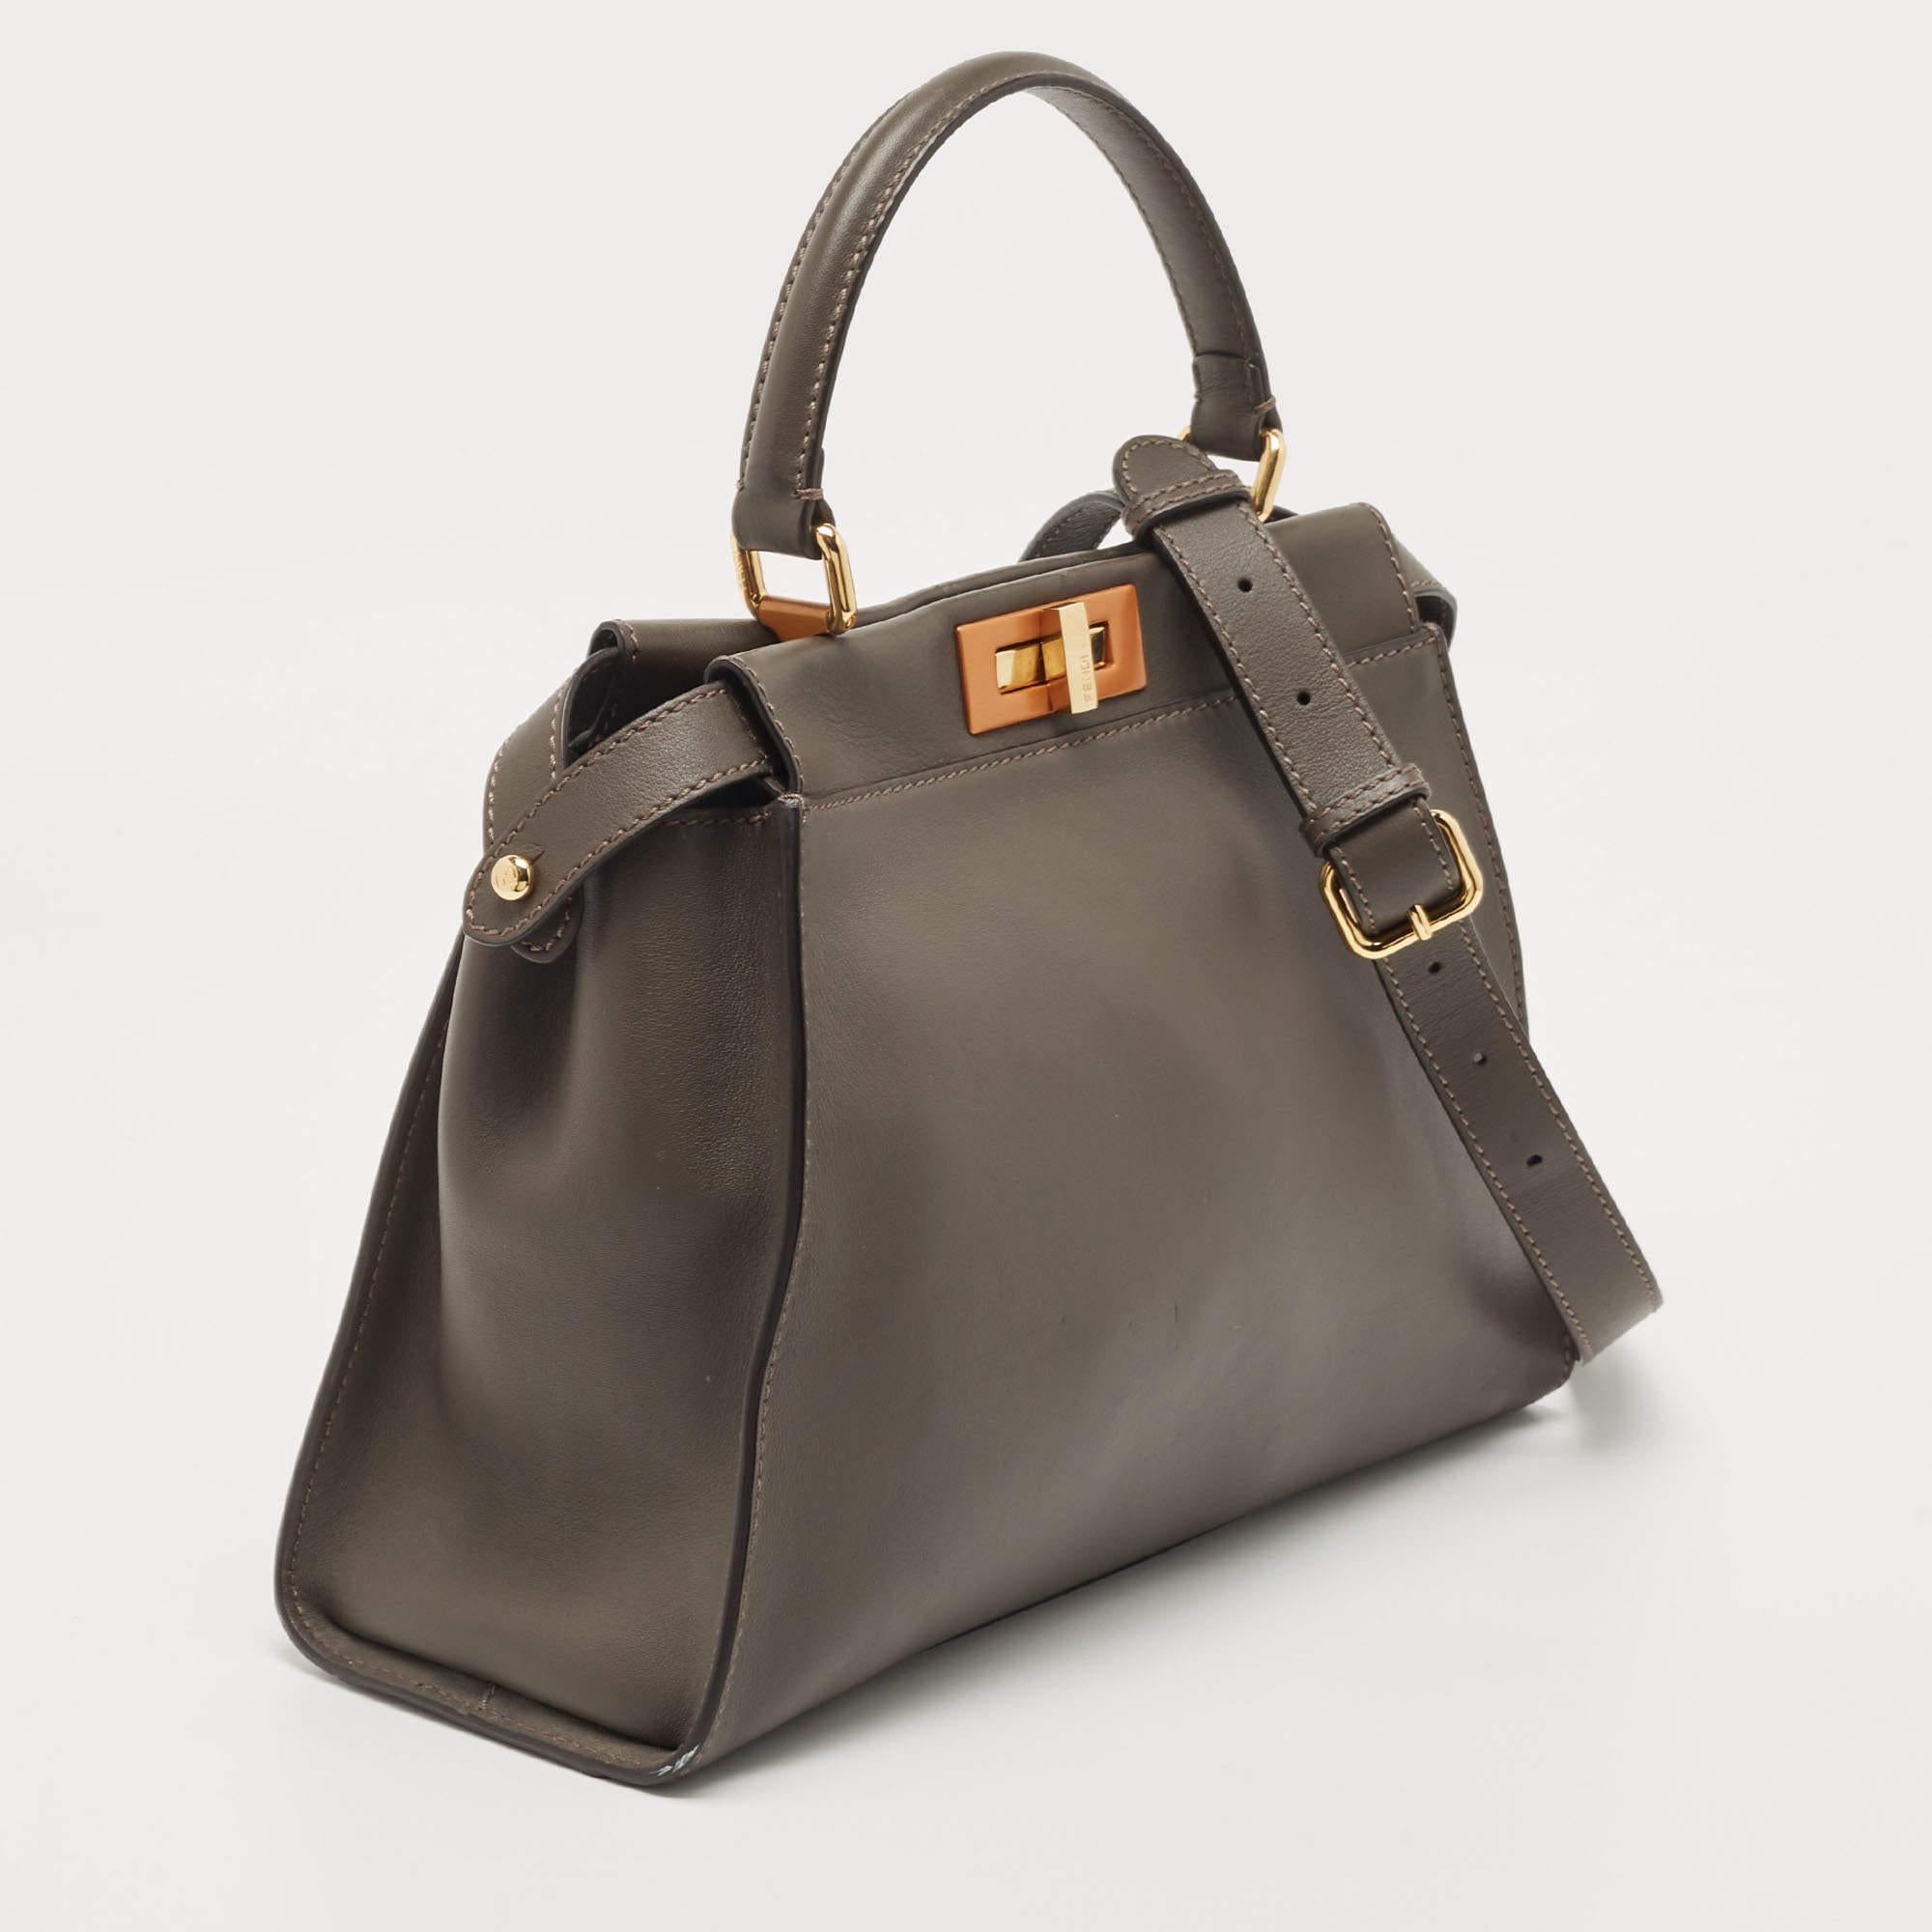 A timeless creation, this bag perfectly balances simplicity with sophistication. It is created from high-quality materials with a top handle to carry it around effortlessly. The perfectly sized interior of this creation will house your belongings in